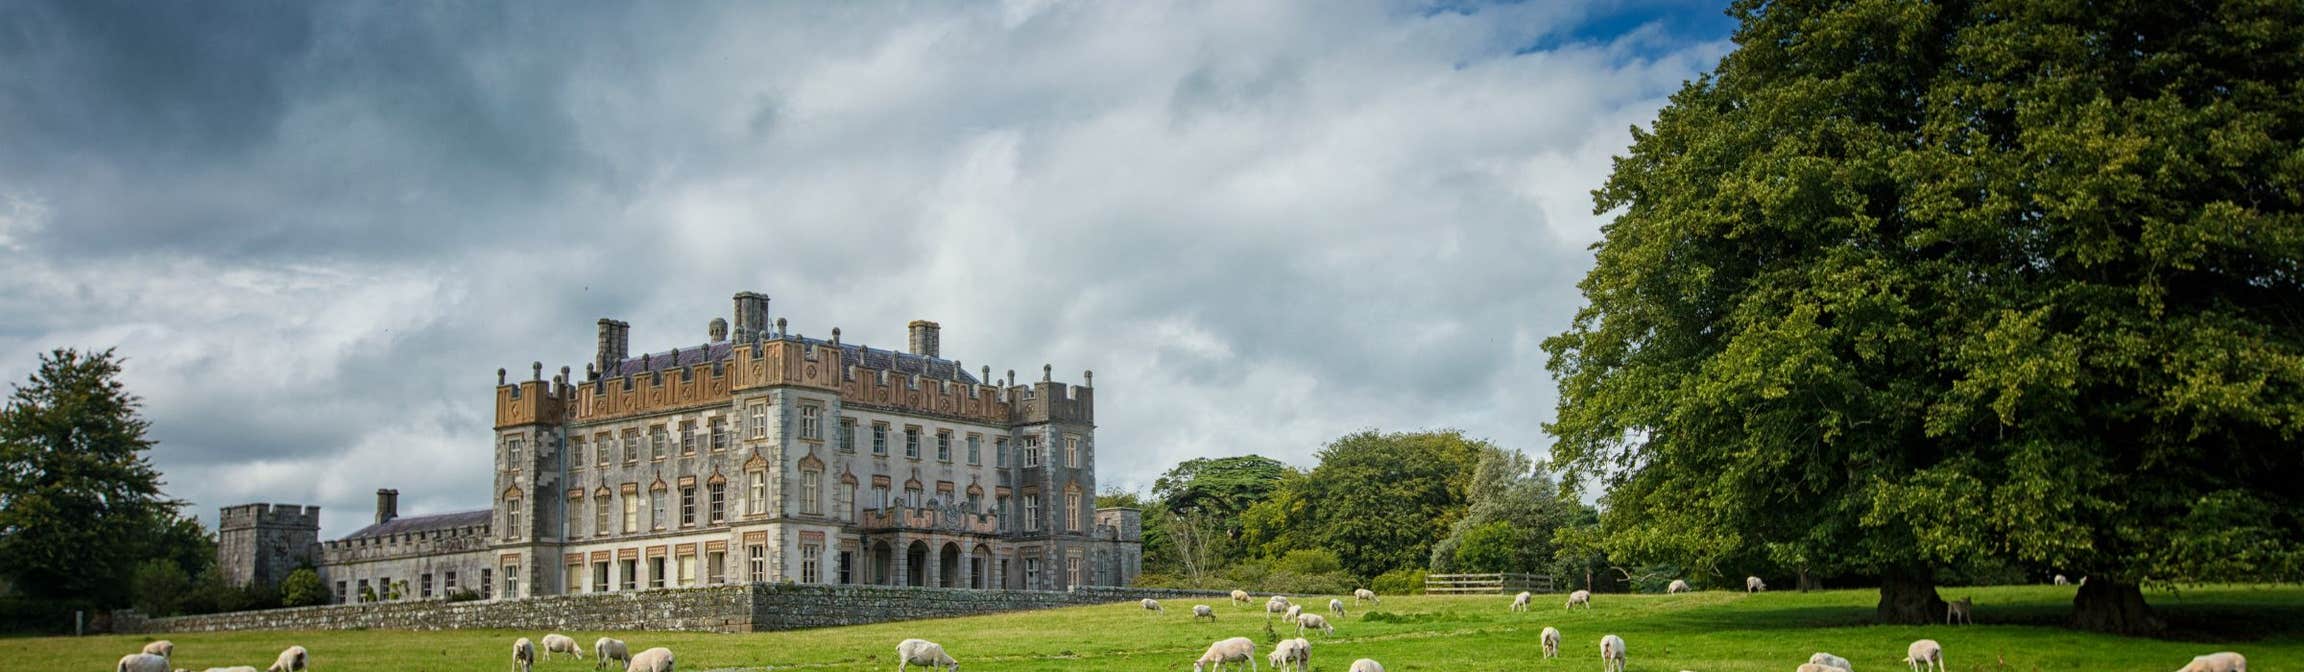 Image of Borris House in County Carlow